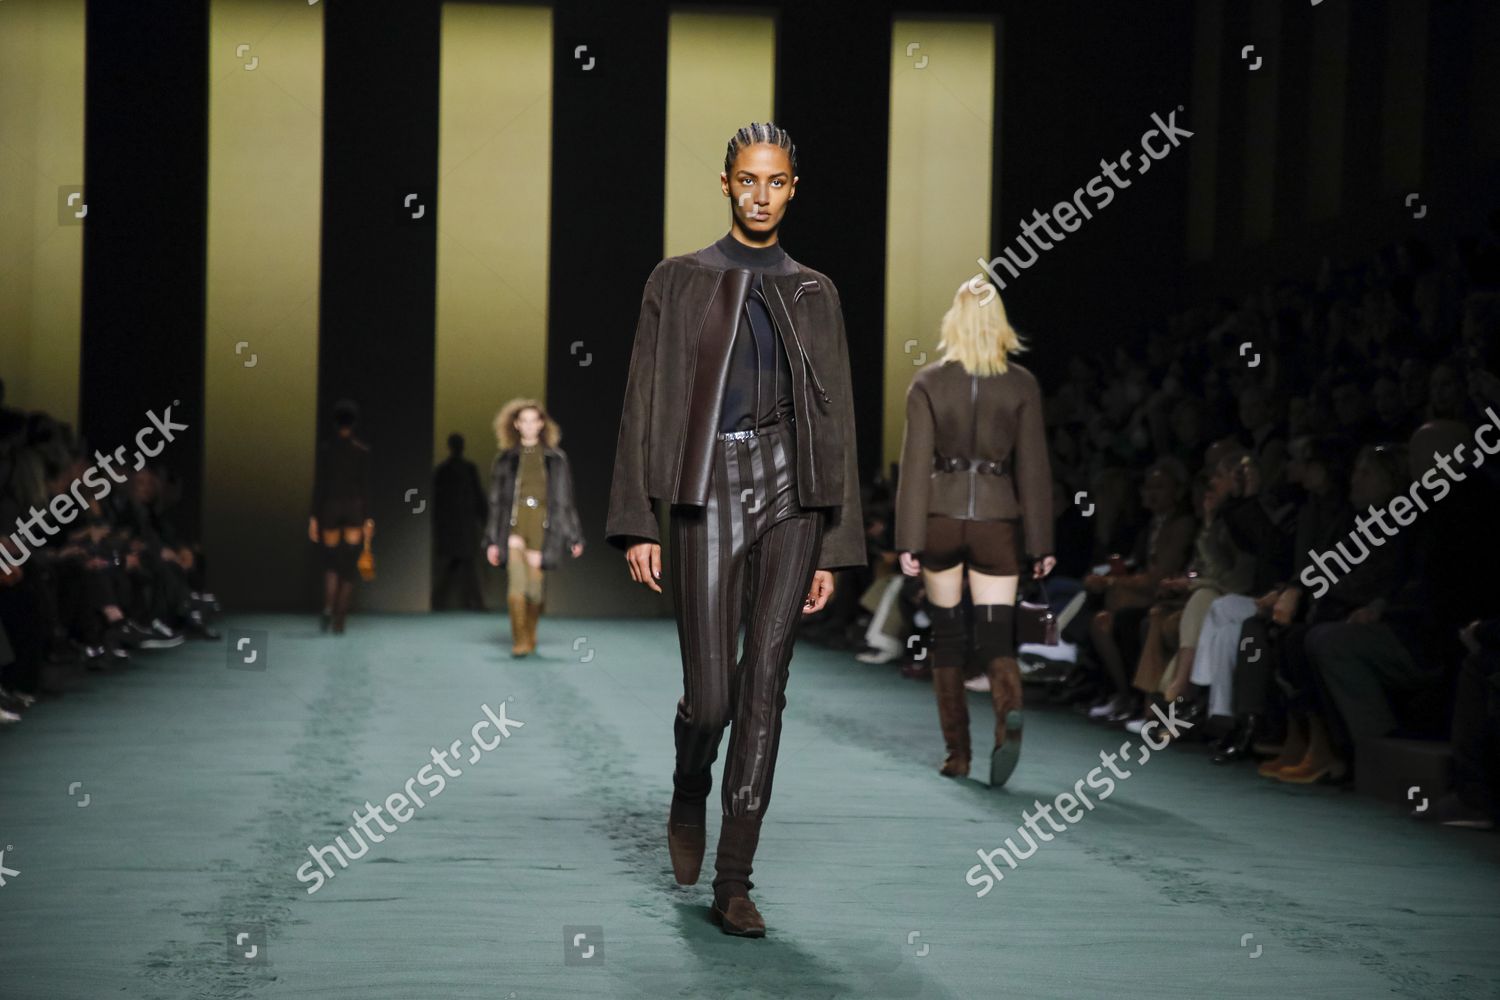 Models On Catwalk Hermes Fashion Show Editorial Stock Photo - Stock ...